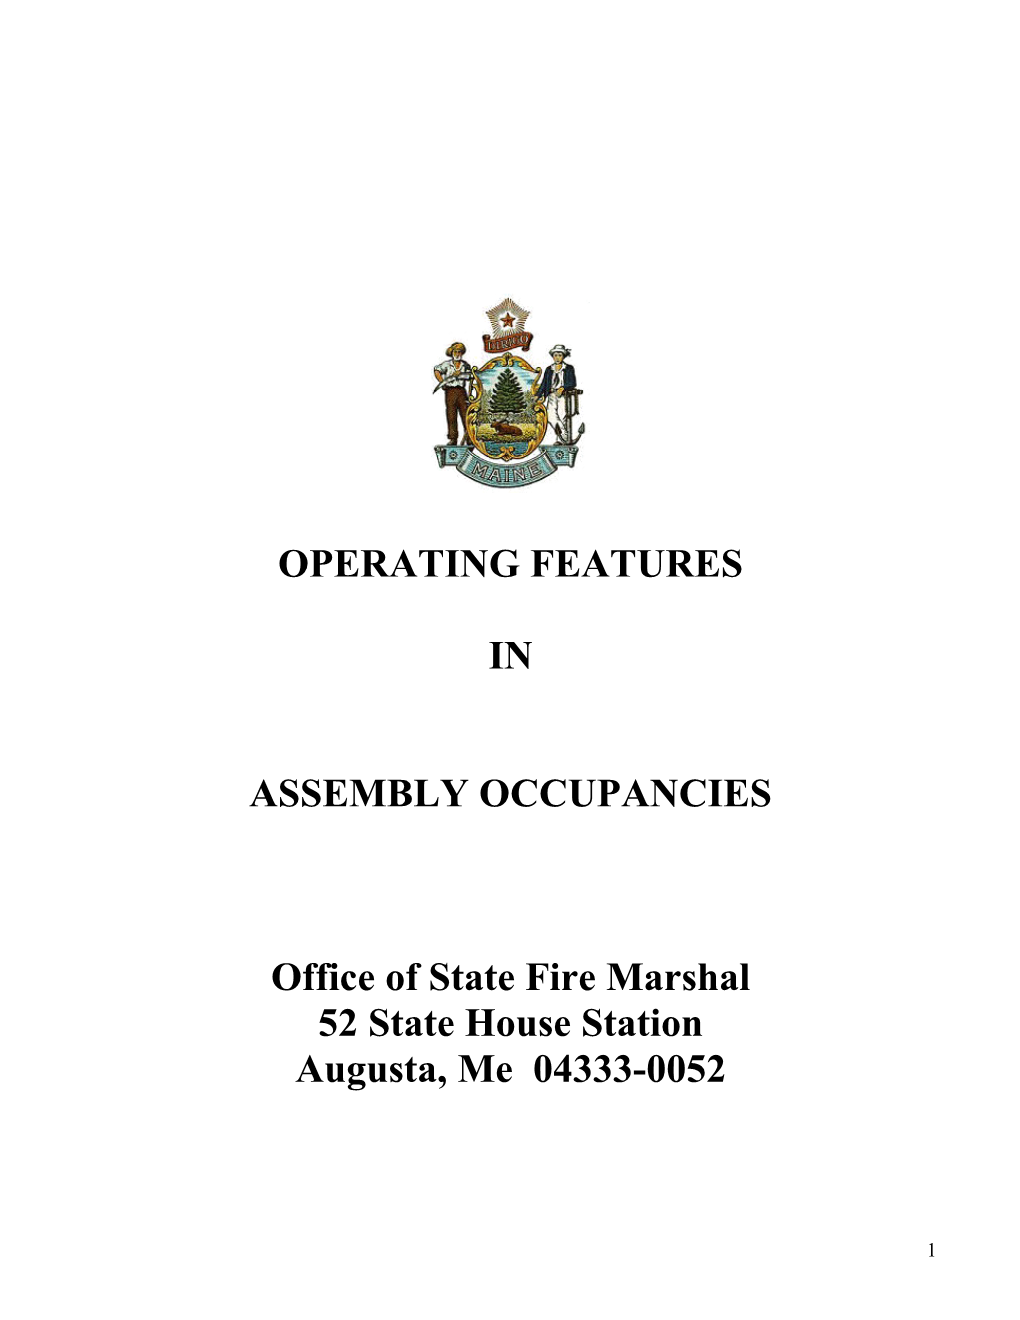 Operating Features in Assembly Occupancies